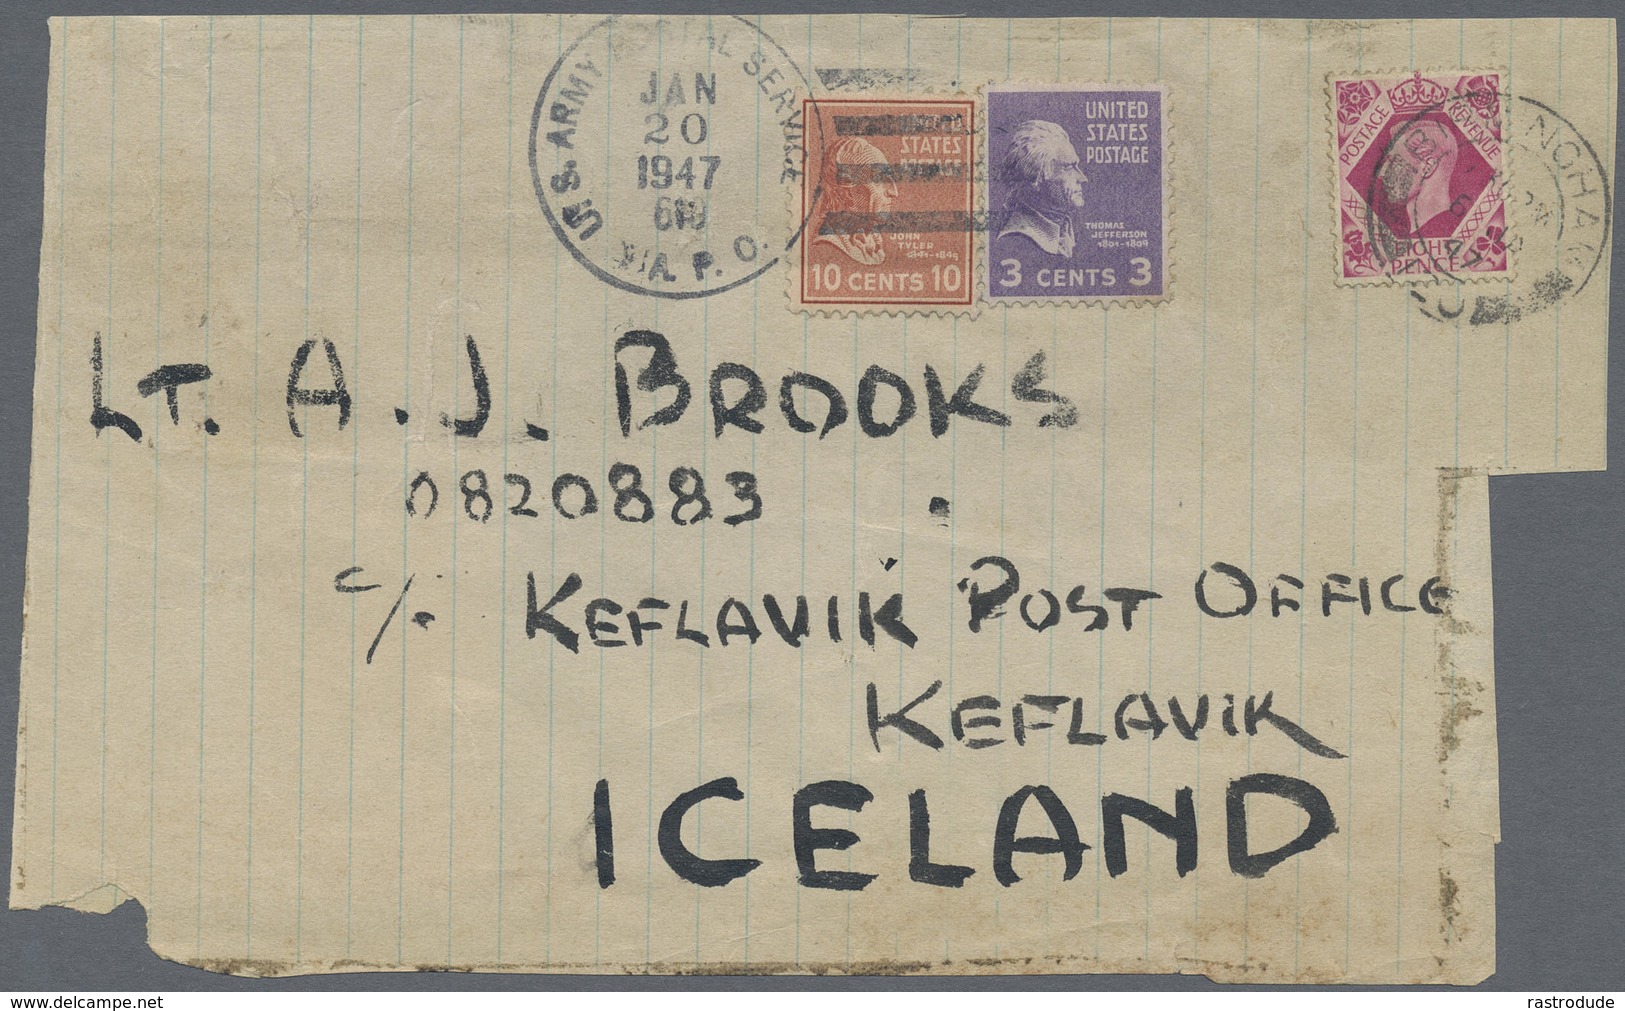 1947, Parcel Front GB To Iceland. Combination U.S + GB 8d Cancelled By Cds " BIRMINGHAM 6 JA 47 " To KEFLAVIK, Iceland - Covers & Documents